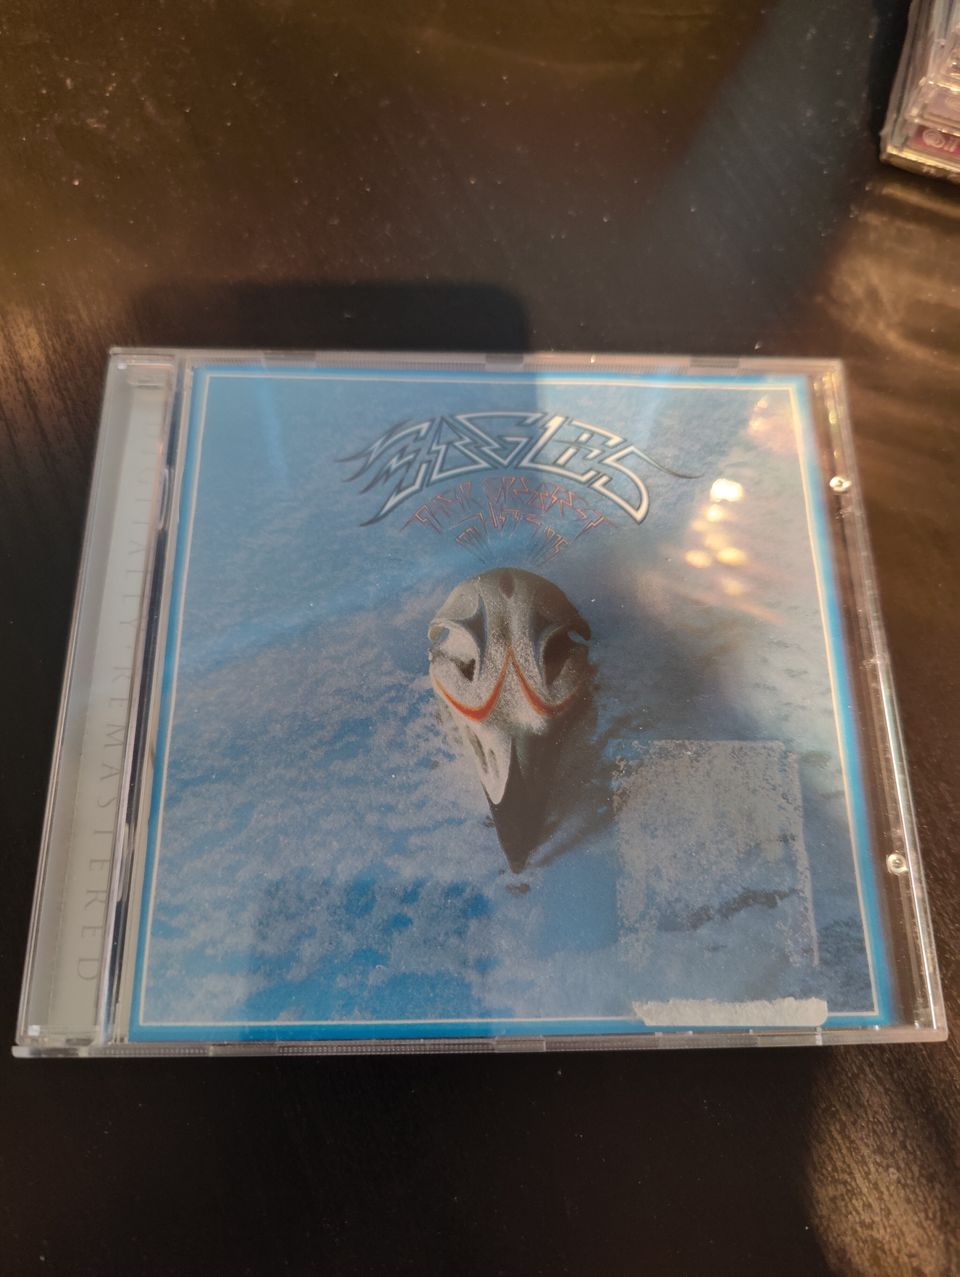 Eagles Their Greatest Hits Digitally Remastered NM/Mint